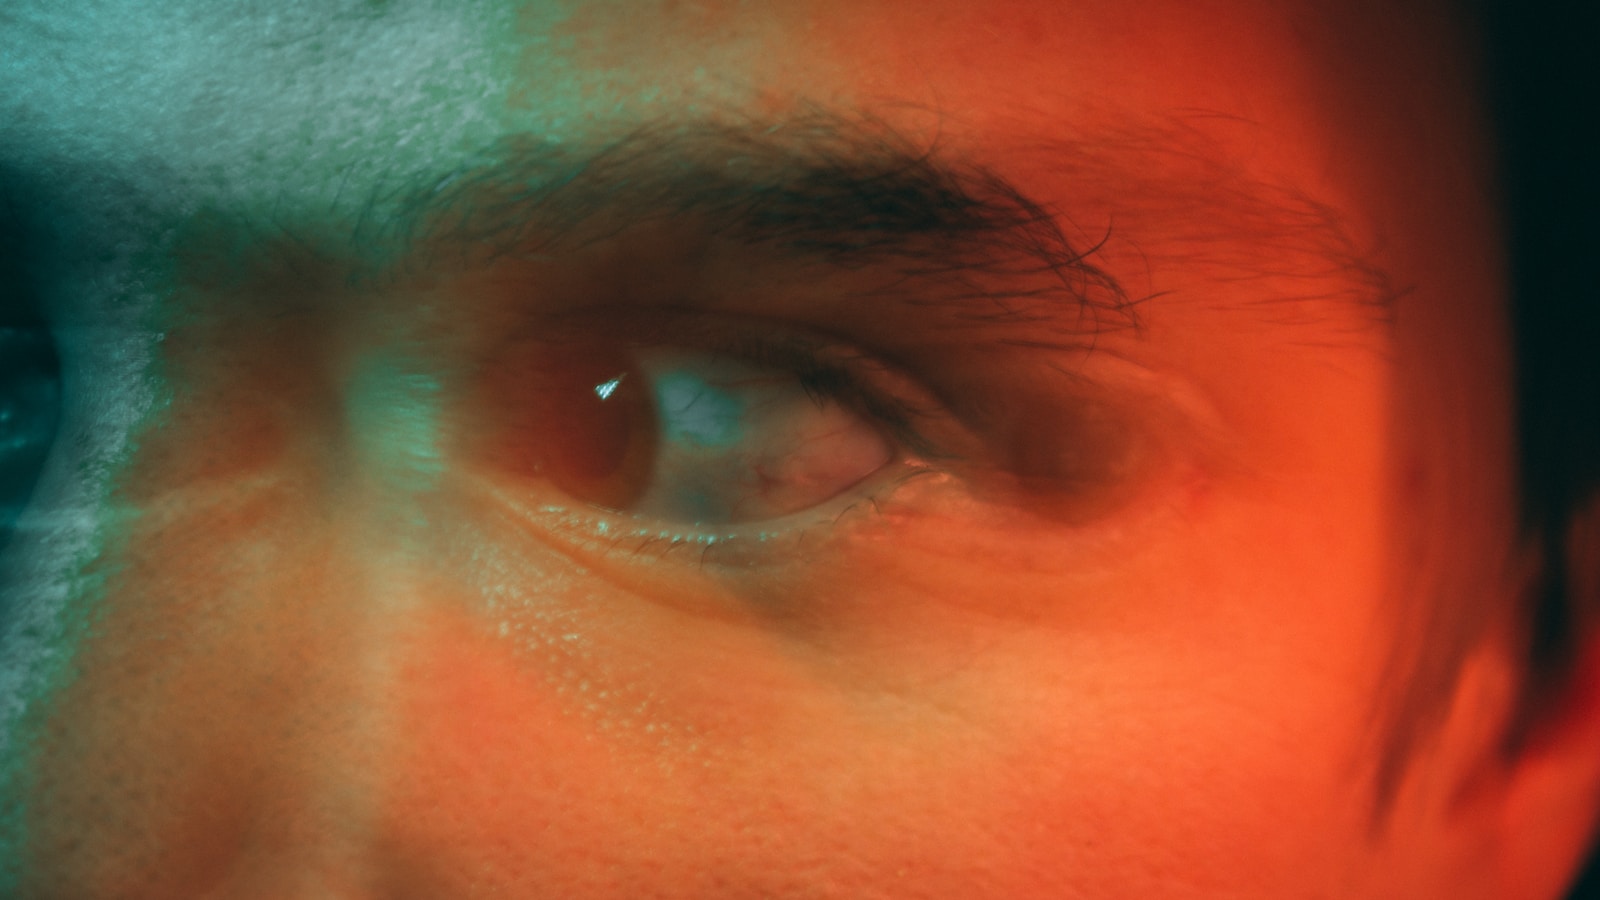 a close up of a man's face with a blurry background